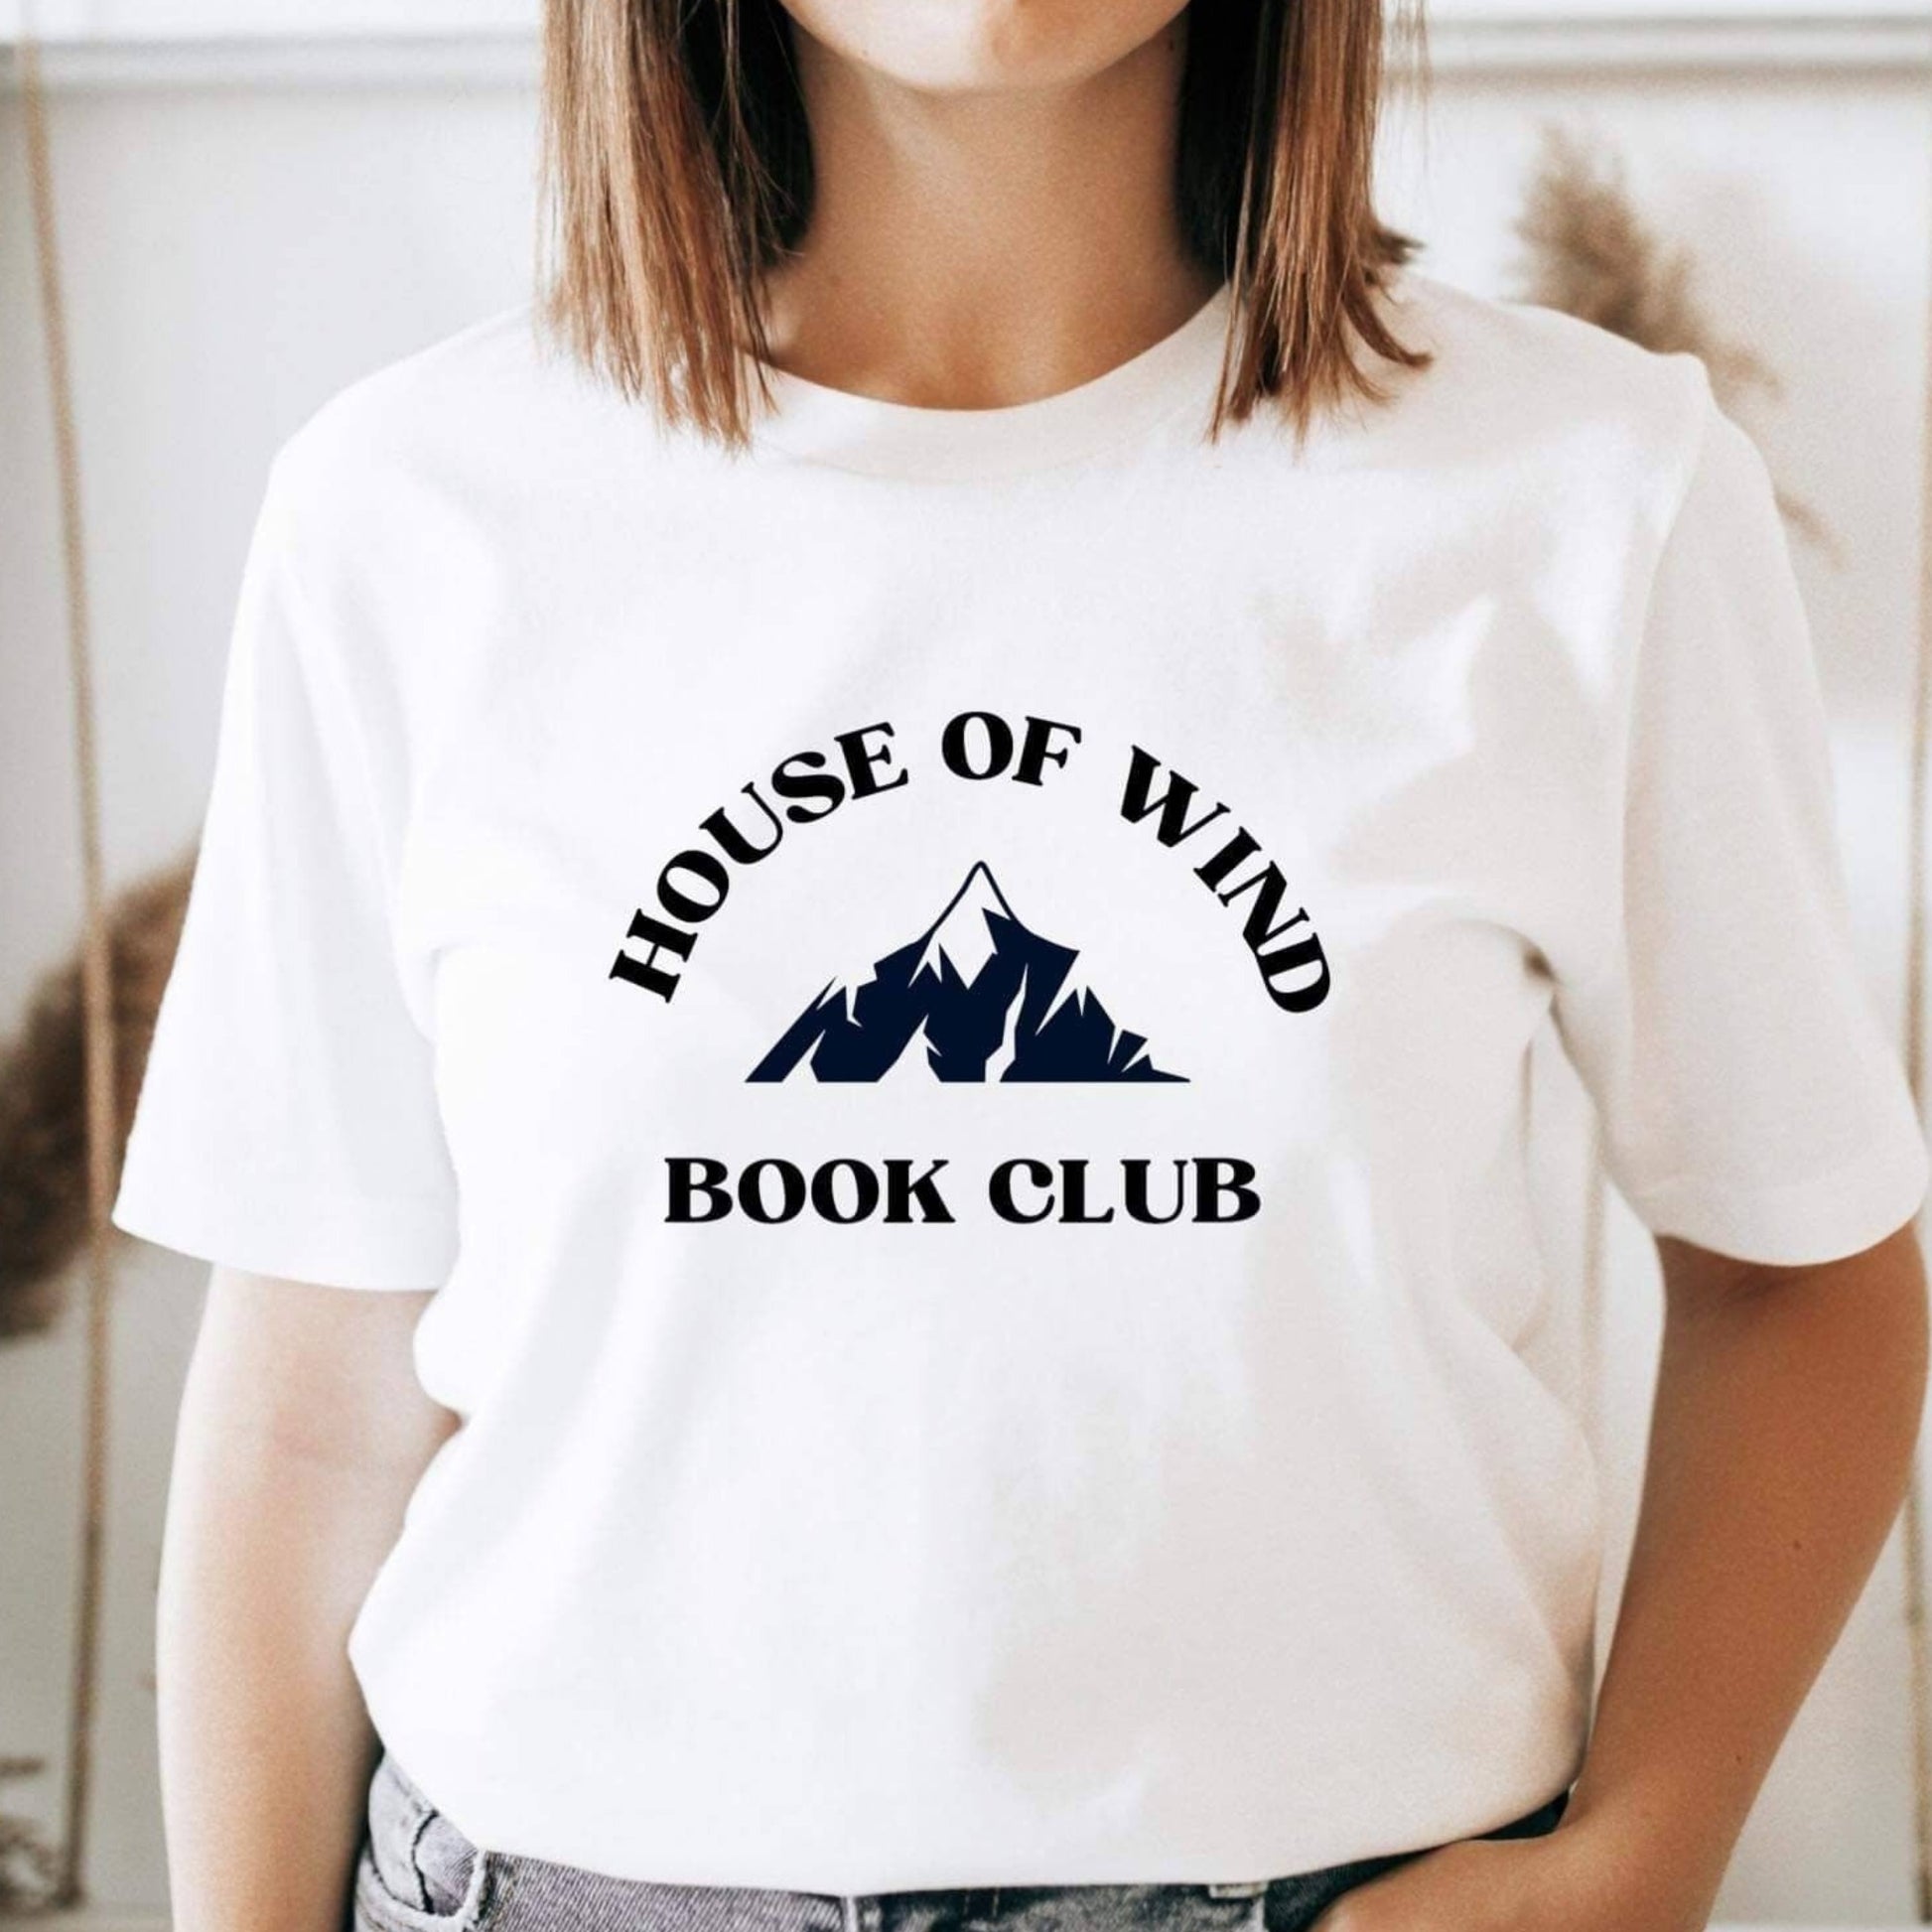 ACOTAR house of wind book club T-shirt - officially licensed by Sarah –  Romantasy Designs